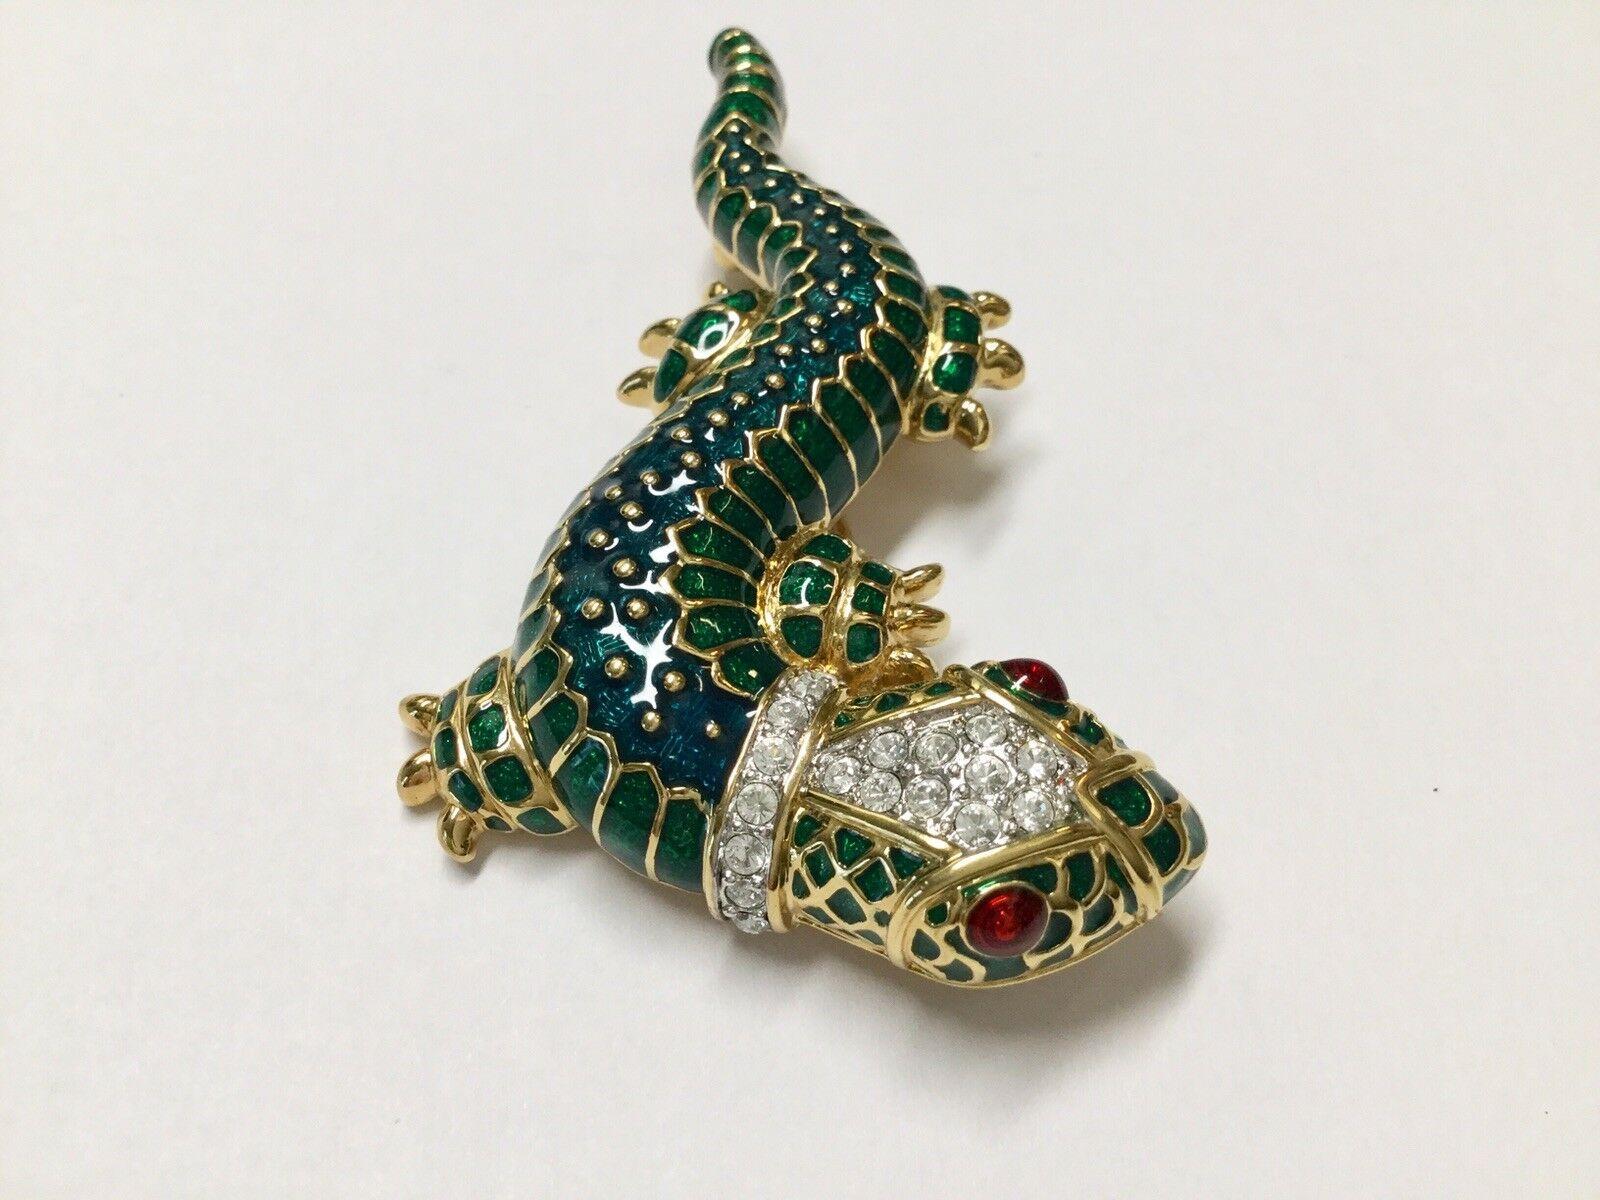 Vintage KENNETH JAY LANE Dark Green Enamel Lizard/Salamander Brooch pave set with Faux Diamonds and Red Enamel Eyes; Gold Tone mounting; signed: Signed KJL; Measures approx. 3 inches x 1.5 inches. To have, to hold, to keep Forever… An Heirloom to